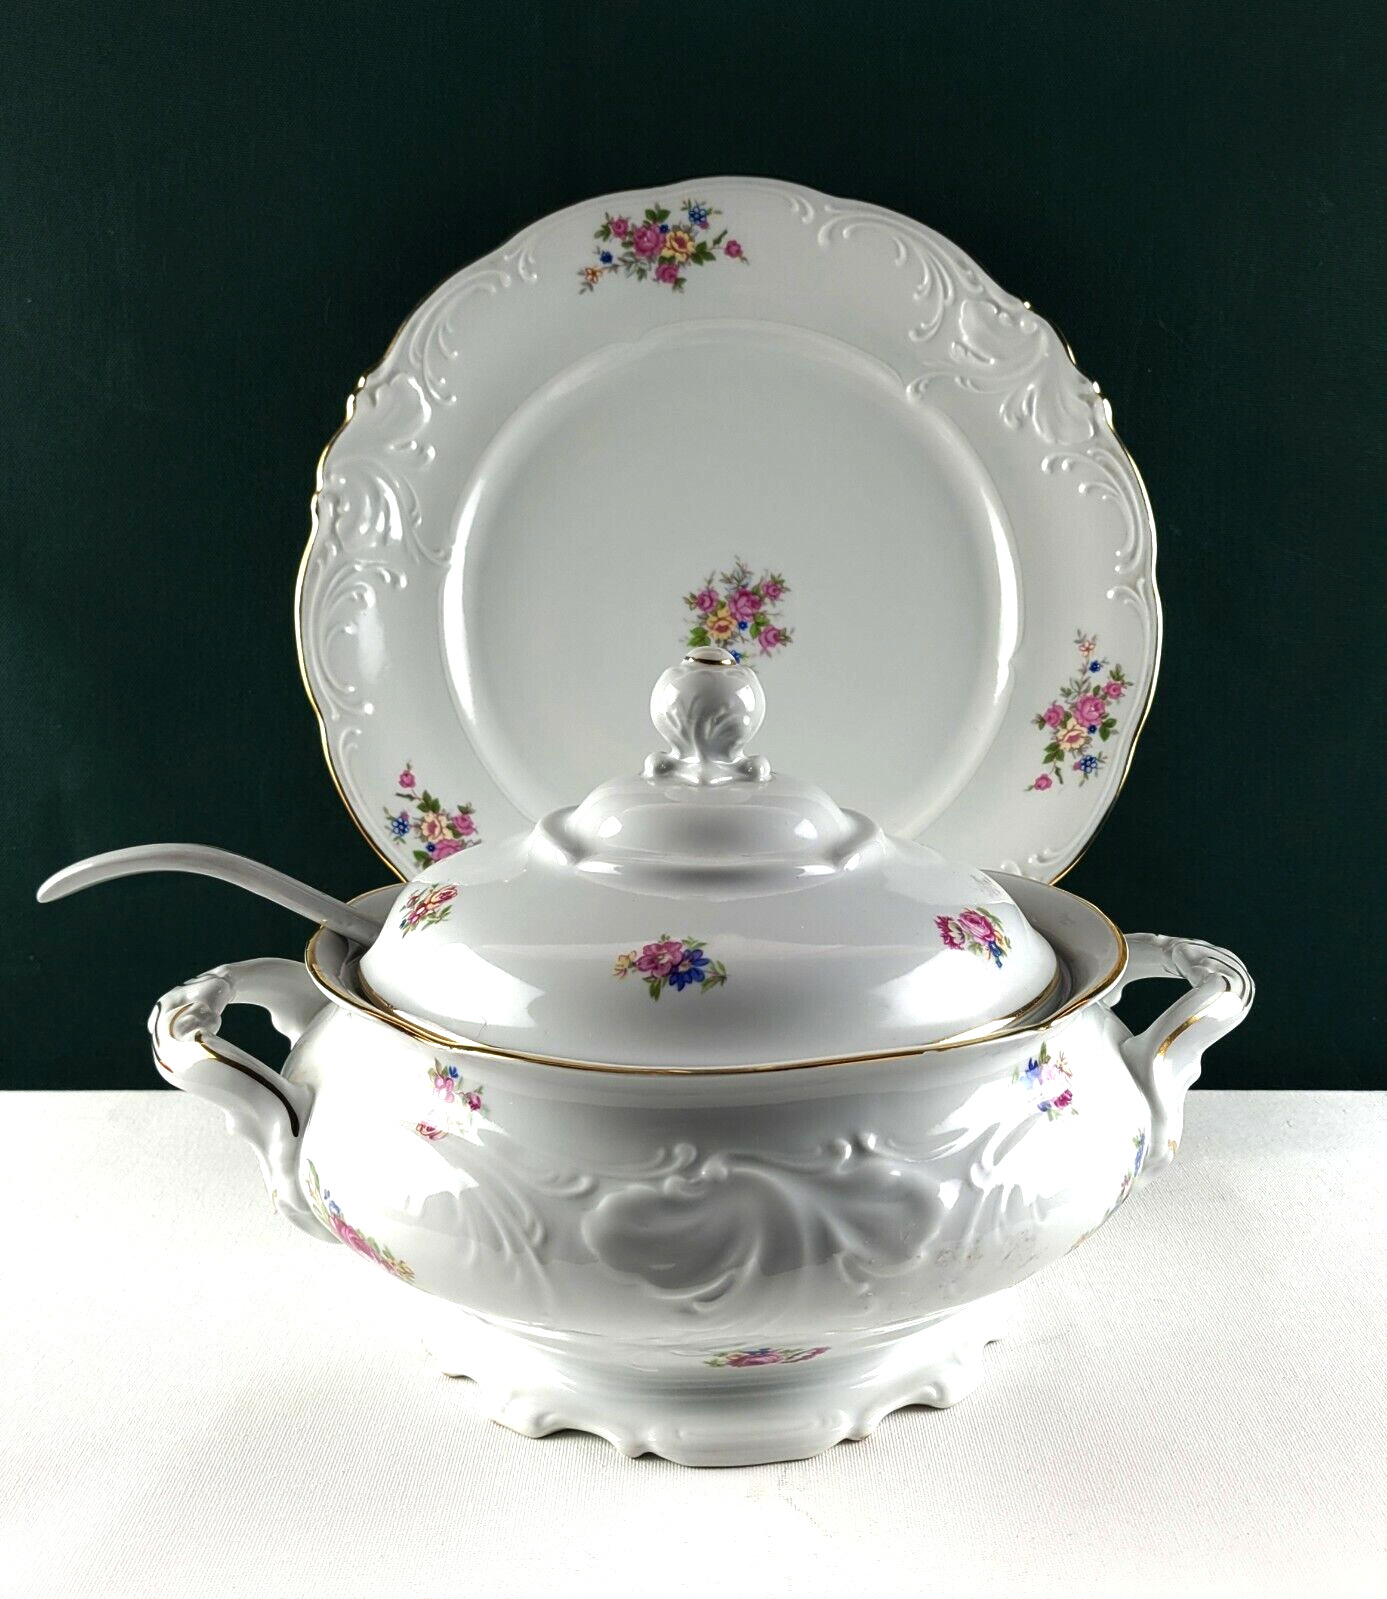 WALBRZYCH White Soup Tureen, w/ Underplate & Ladle Gold Trim Multicolor Flowers